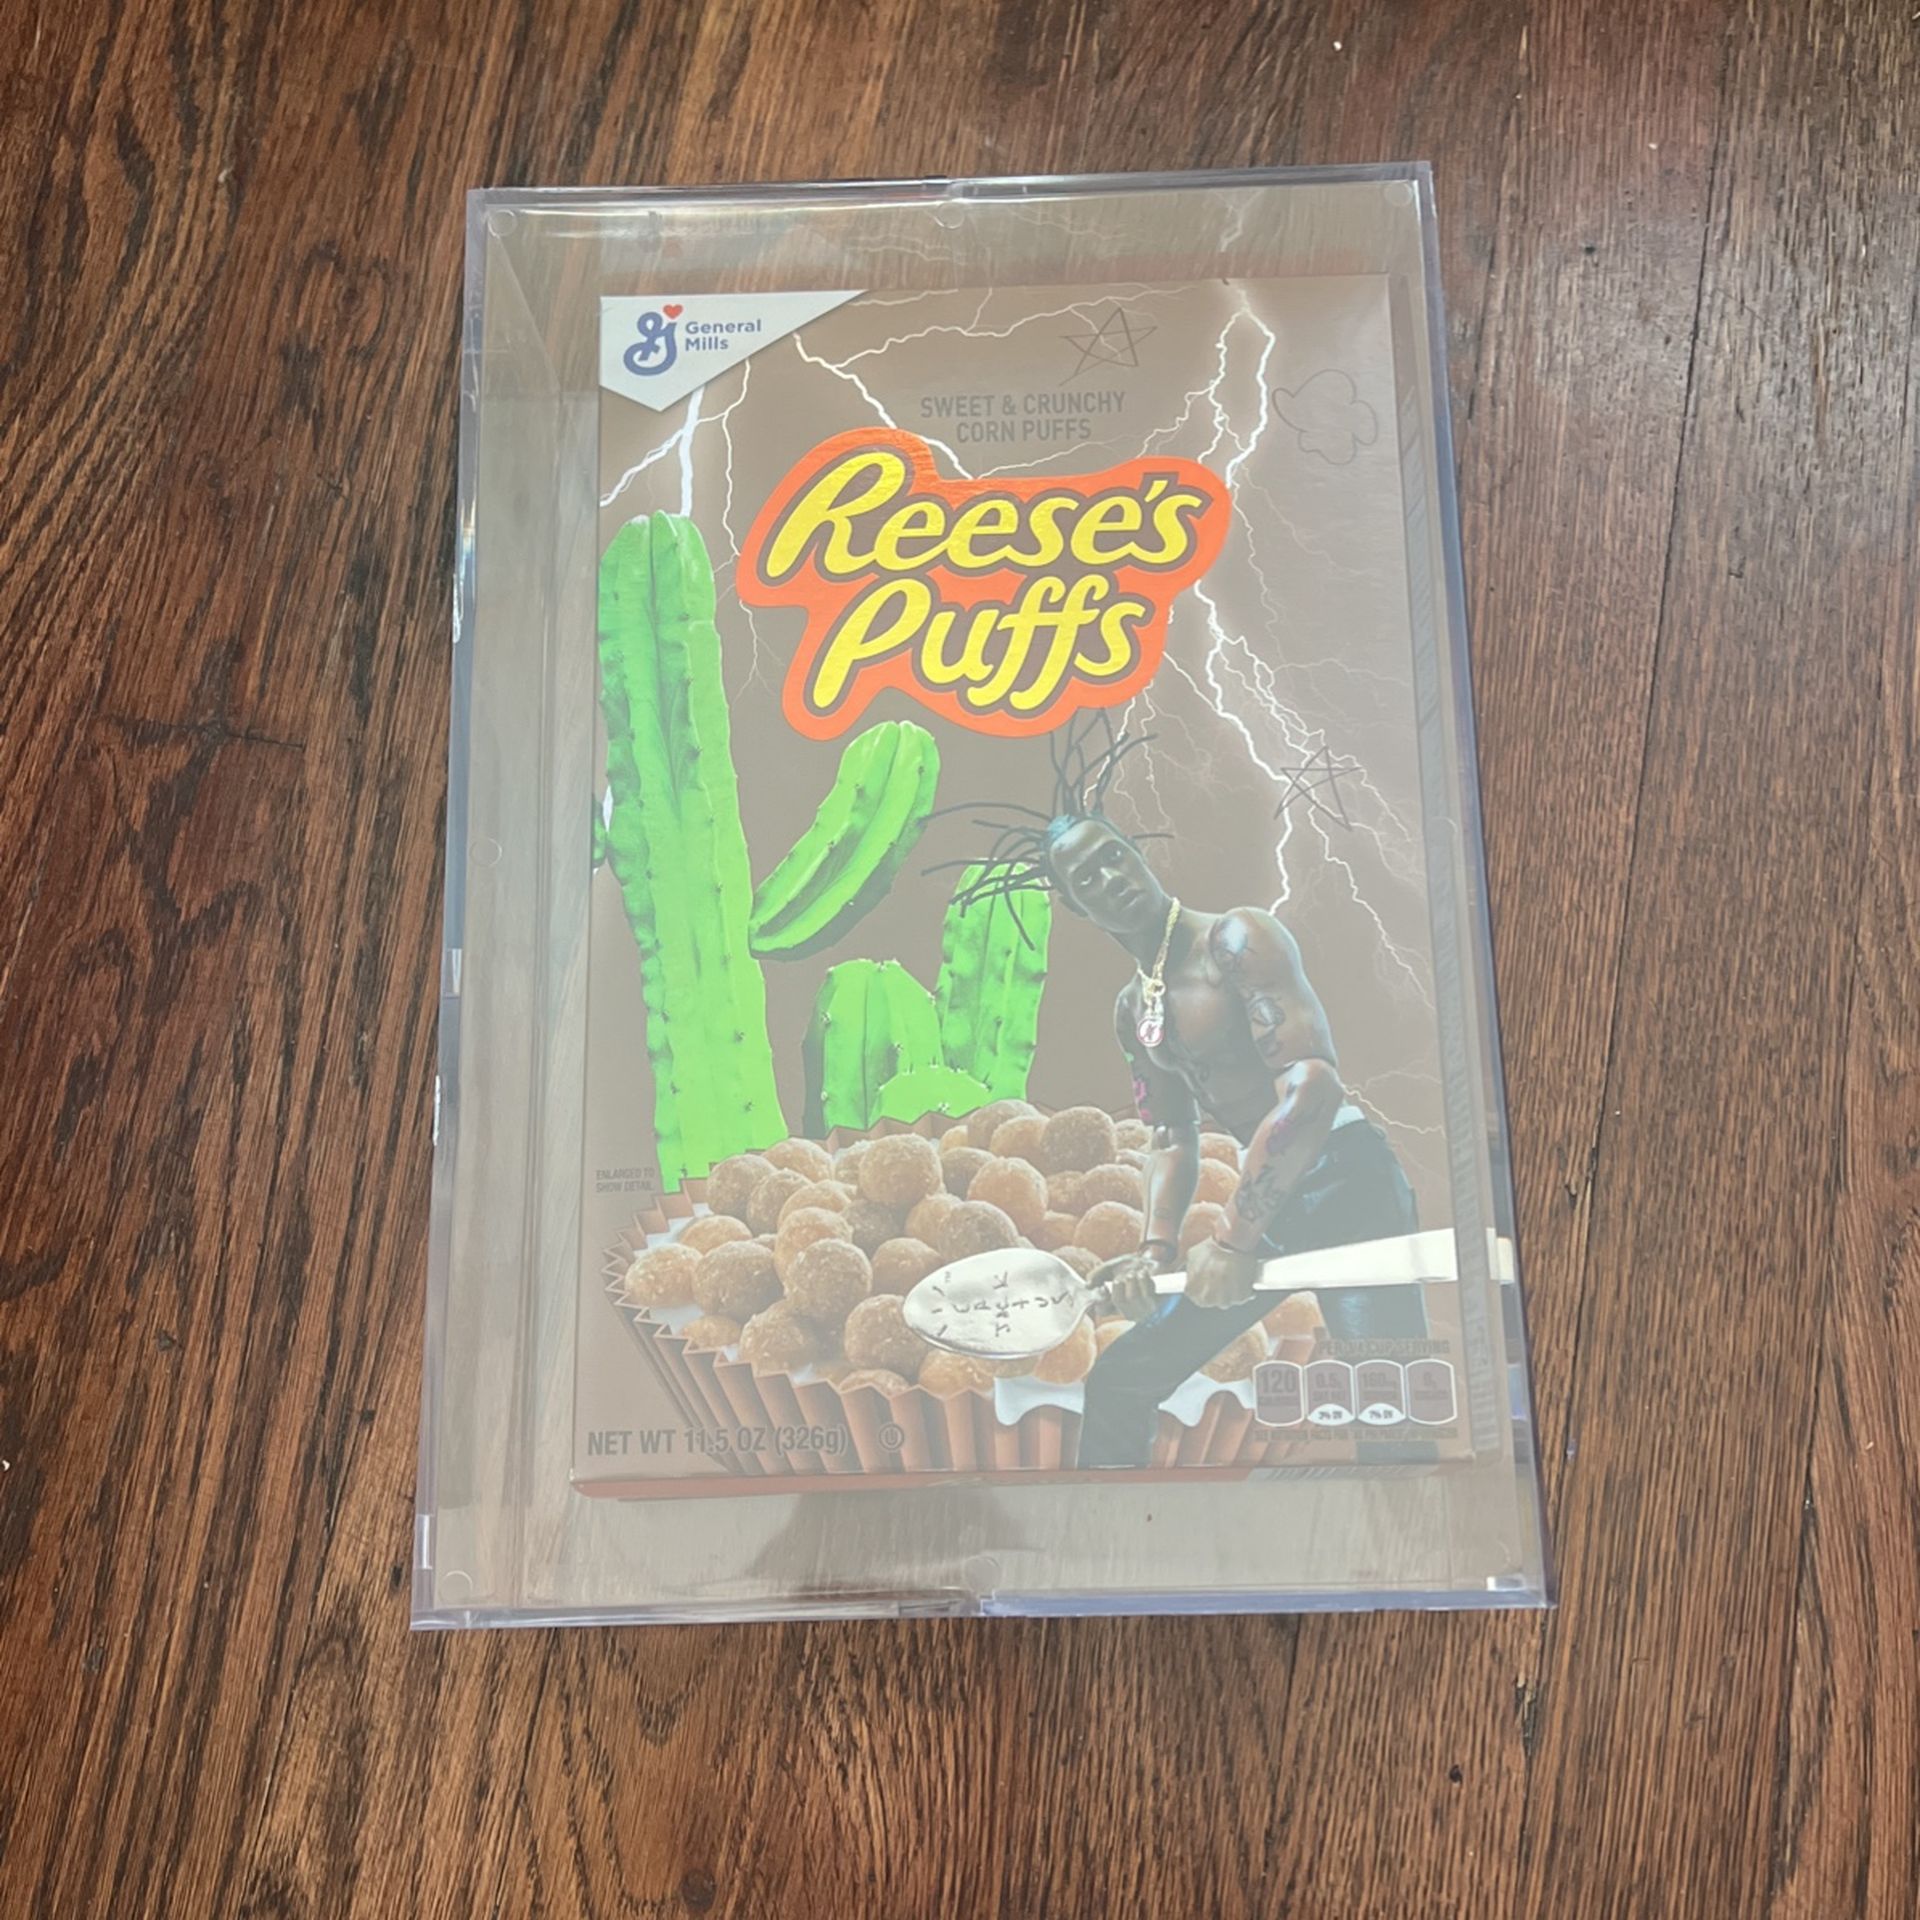  Travis Scott x Reese's Puffs Cereal Limited Edition Box w/ Acrylic Case (Not Fit For Human Consumption)